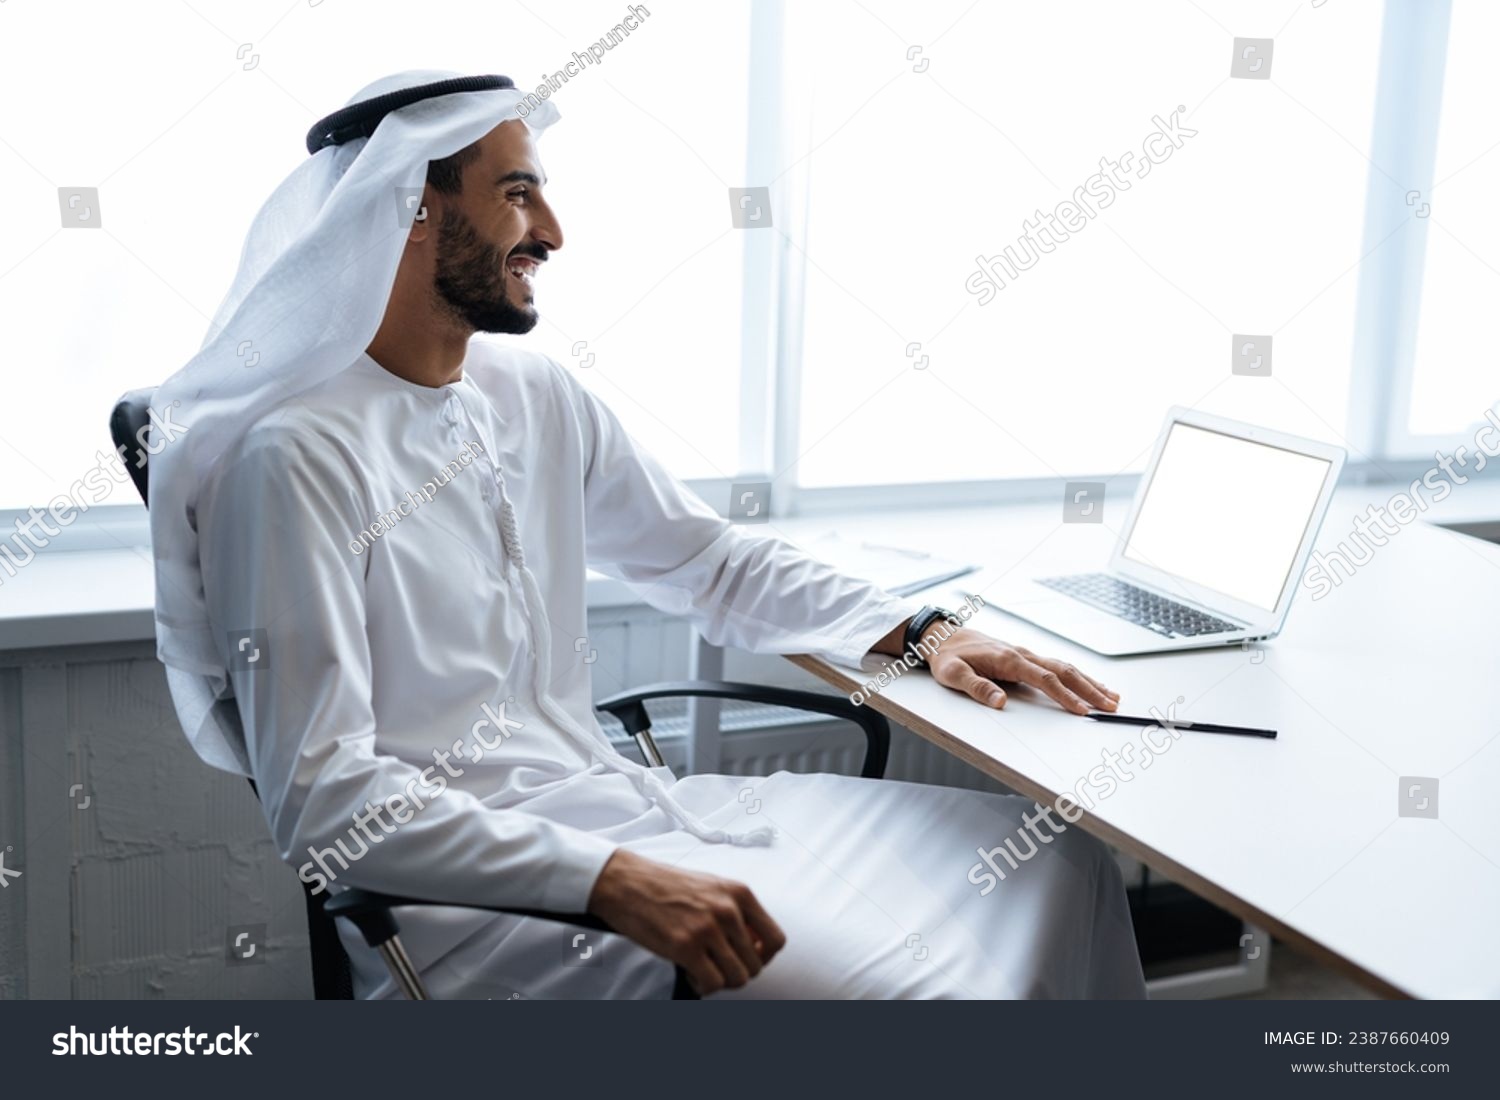 Handsome man with dish dasha working in his business office of Dubai. Portraits of a successful businessman in traditional emirates white dress. Concept about middle eastern cultures. #2387660409